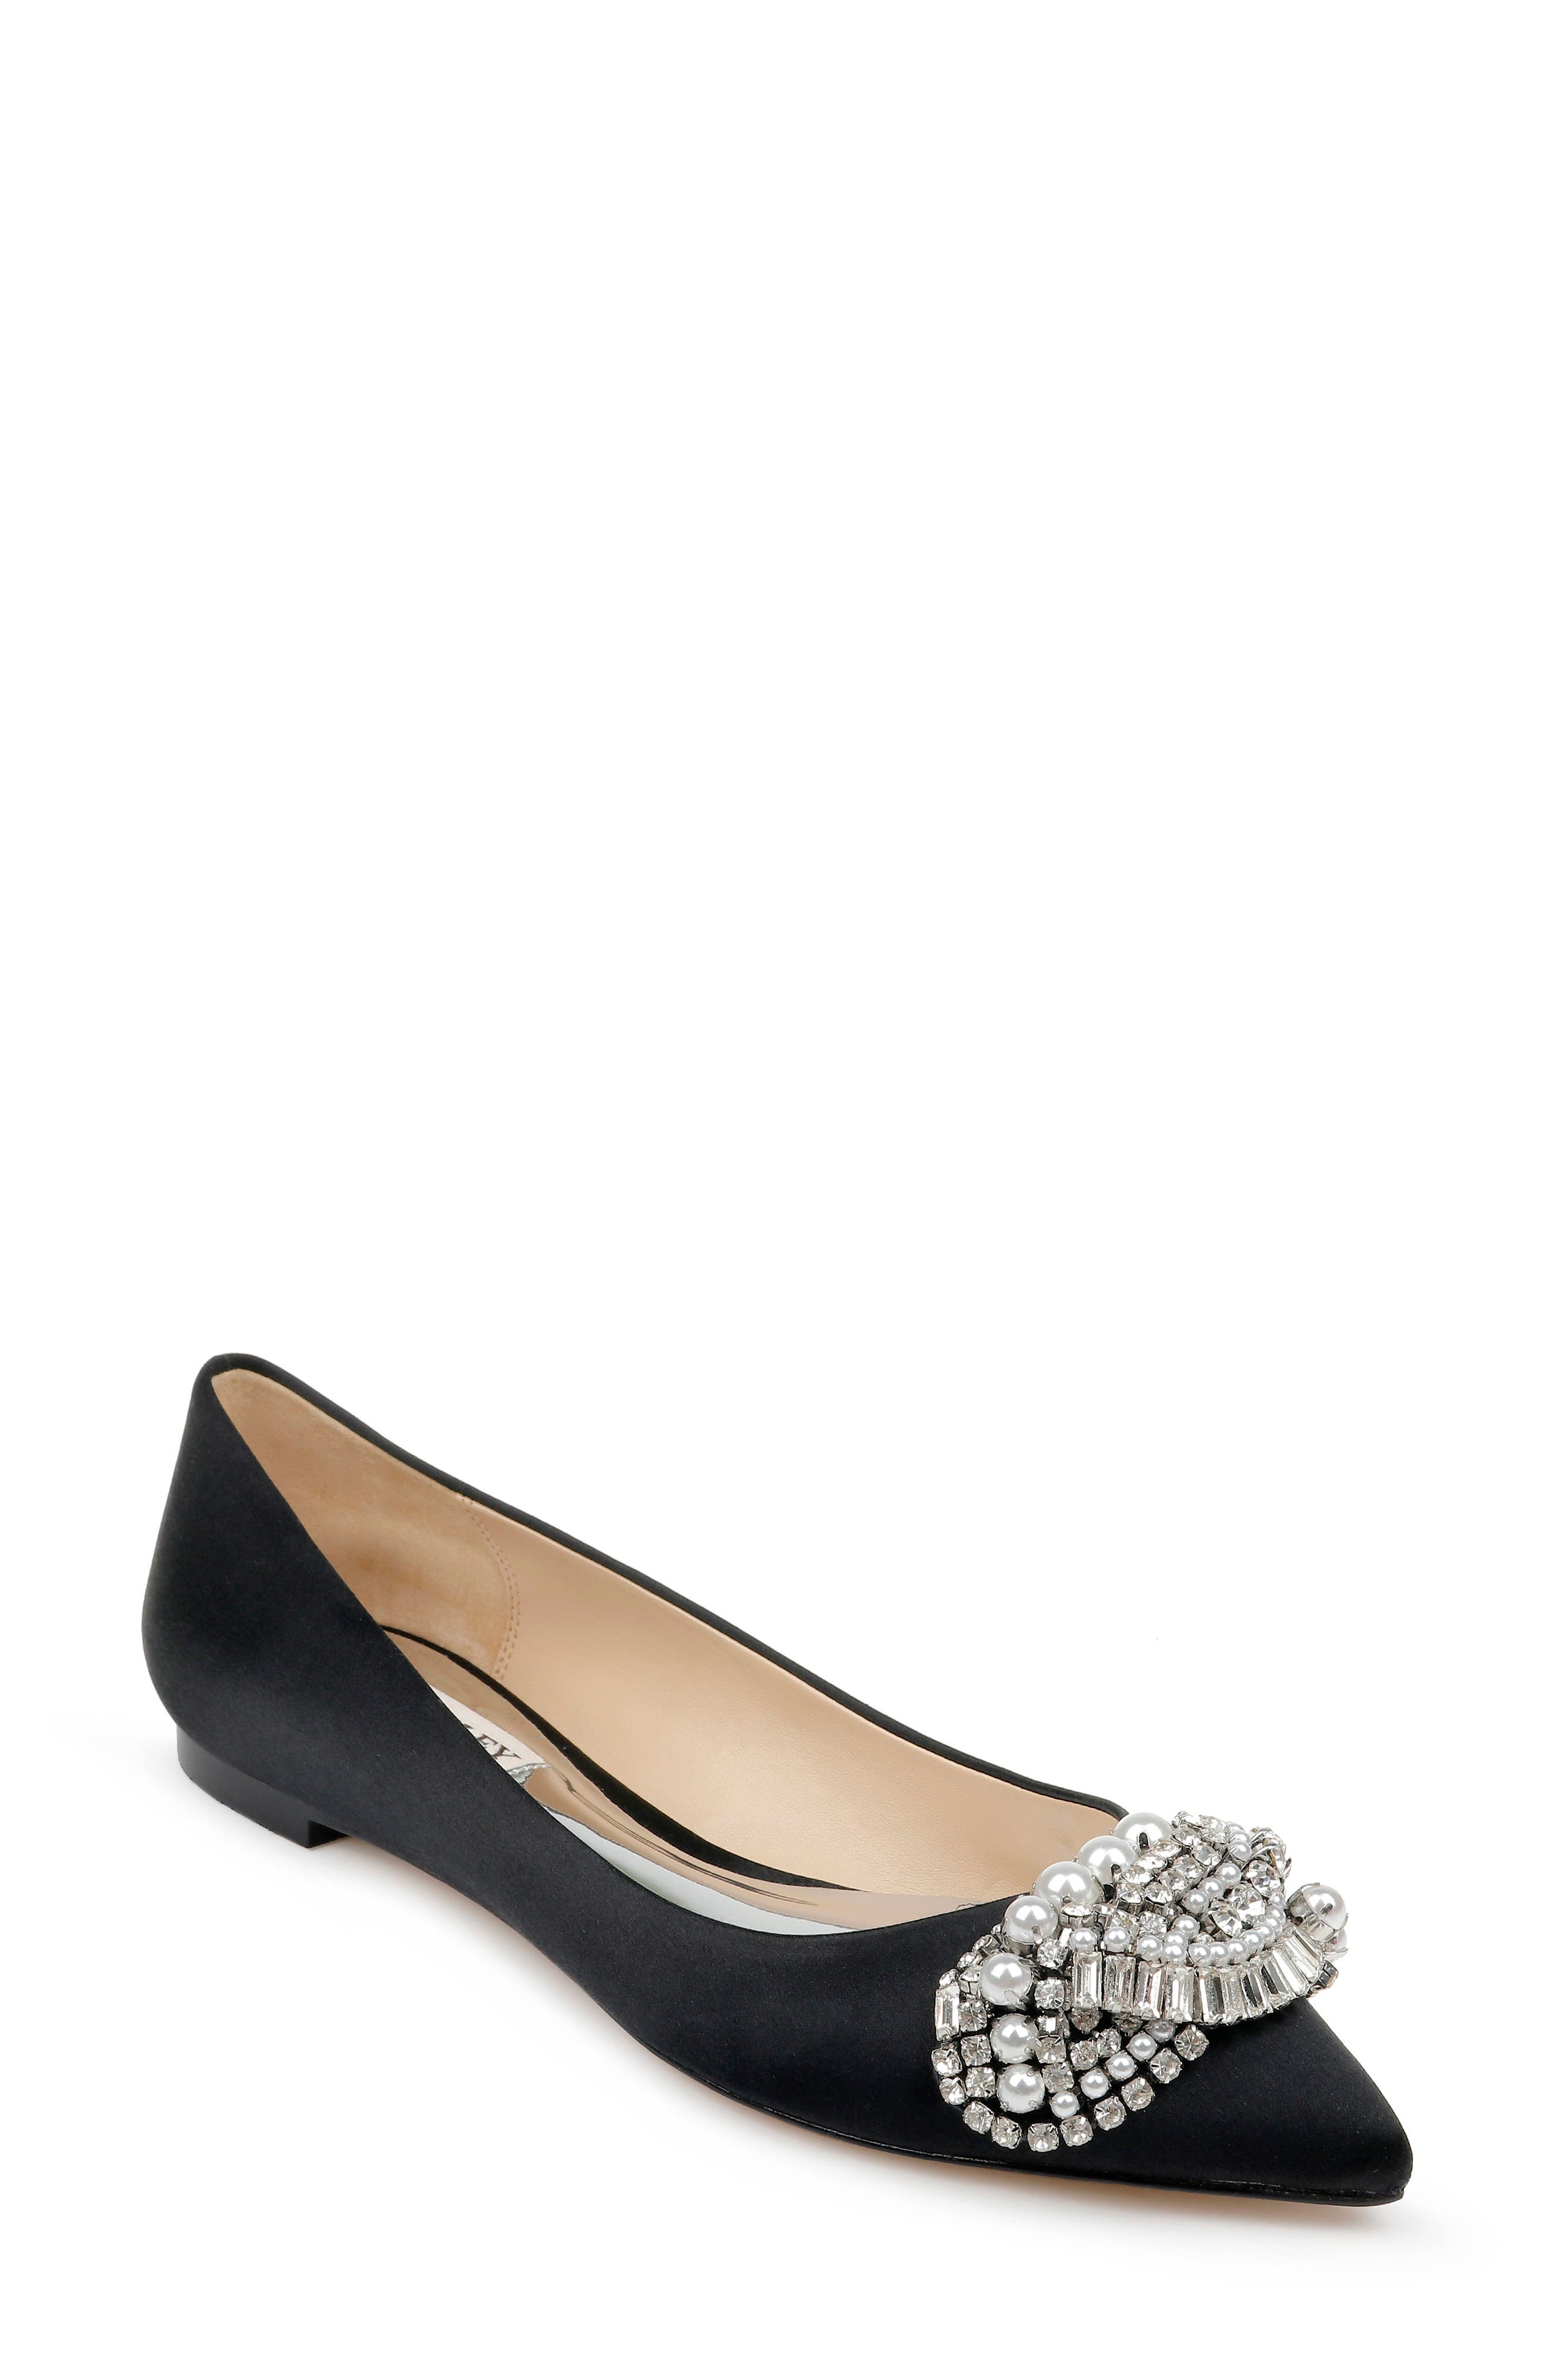 Badgley Mischka Collection Shoes Sale 